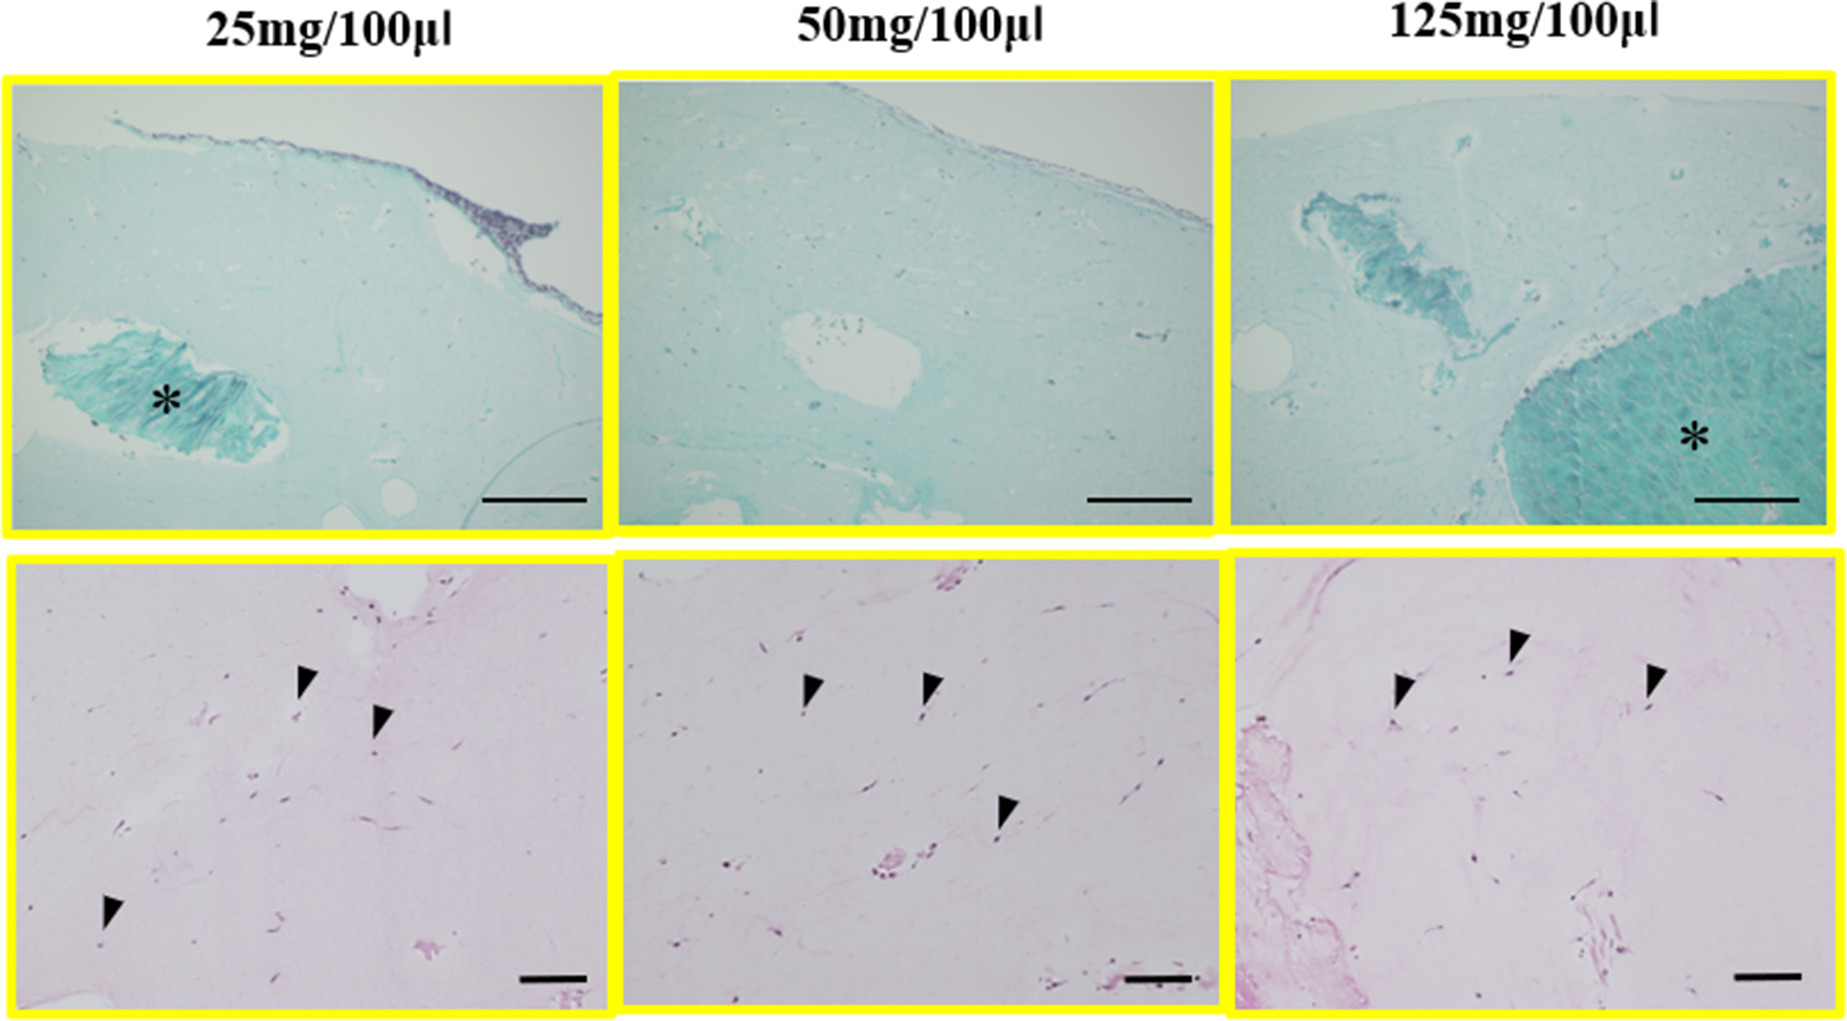 Fig. 1 
          Upper section: Safranin-O/Fast green staining in each group; asterisks denote minced meniscus. Scale = 300 μm. Lower section: haematoxylin and eosin staining in each group. Arrowheads indicate the cells in the atelocollagen gel, scale = 100 μm. The measurements 25 mg, 50 mg, and 125 mg indicate the volume of minced meniscus embedded in 100 µl of atelocollagen.
        